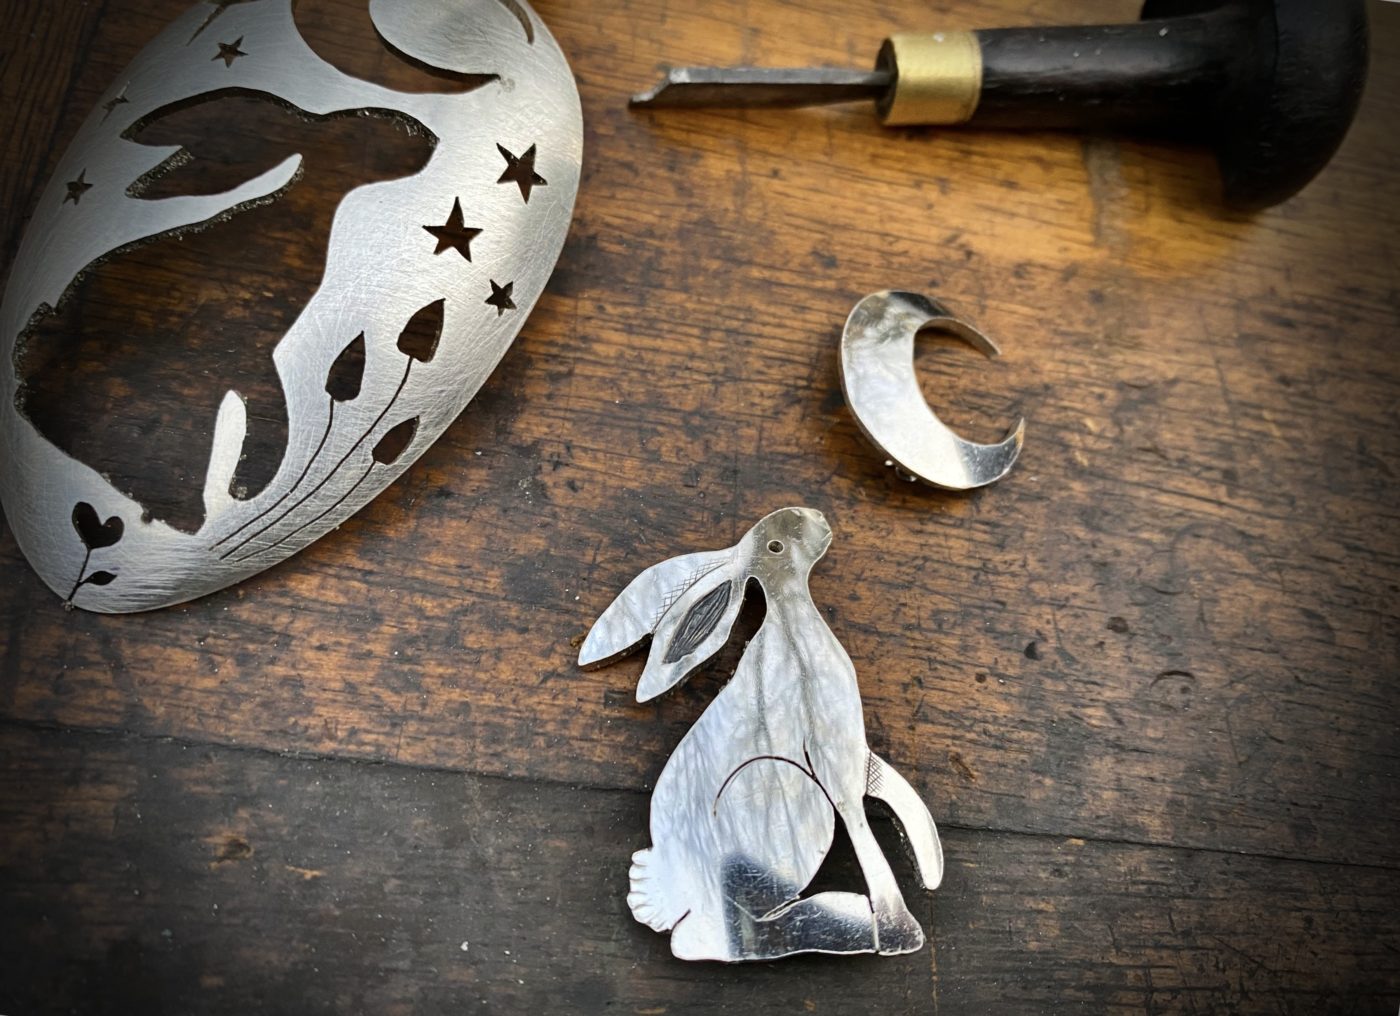 moon gazing hare brooch made from upcycled flatware, repurposed spoons, cutlery by hairy growler jewellery